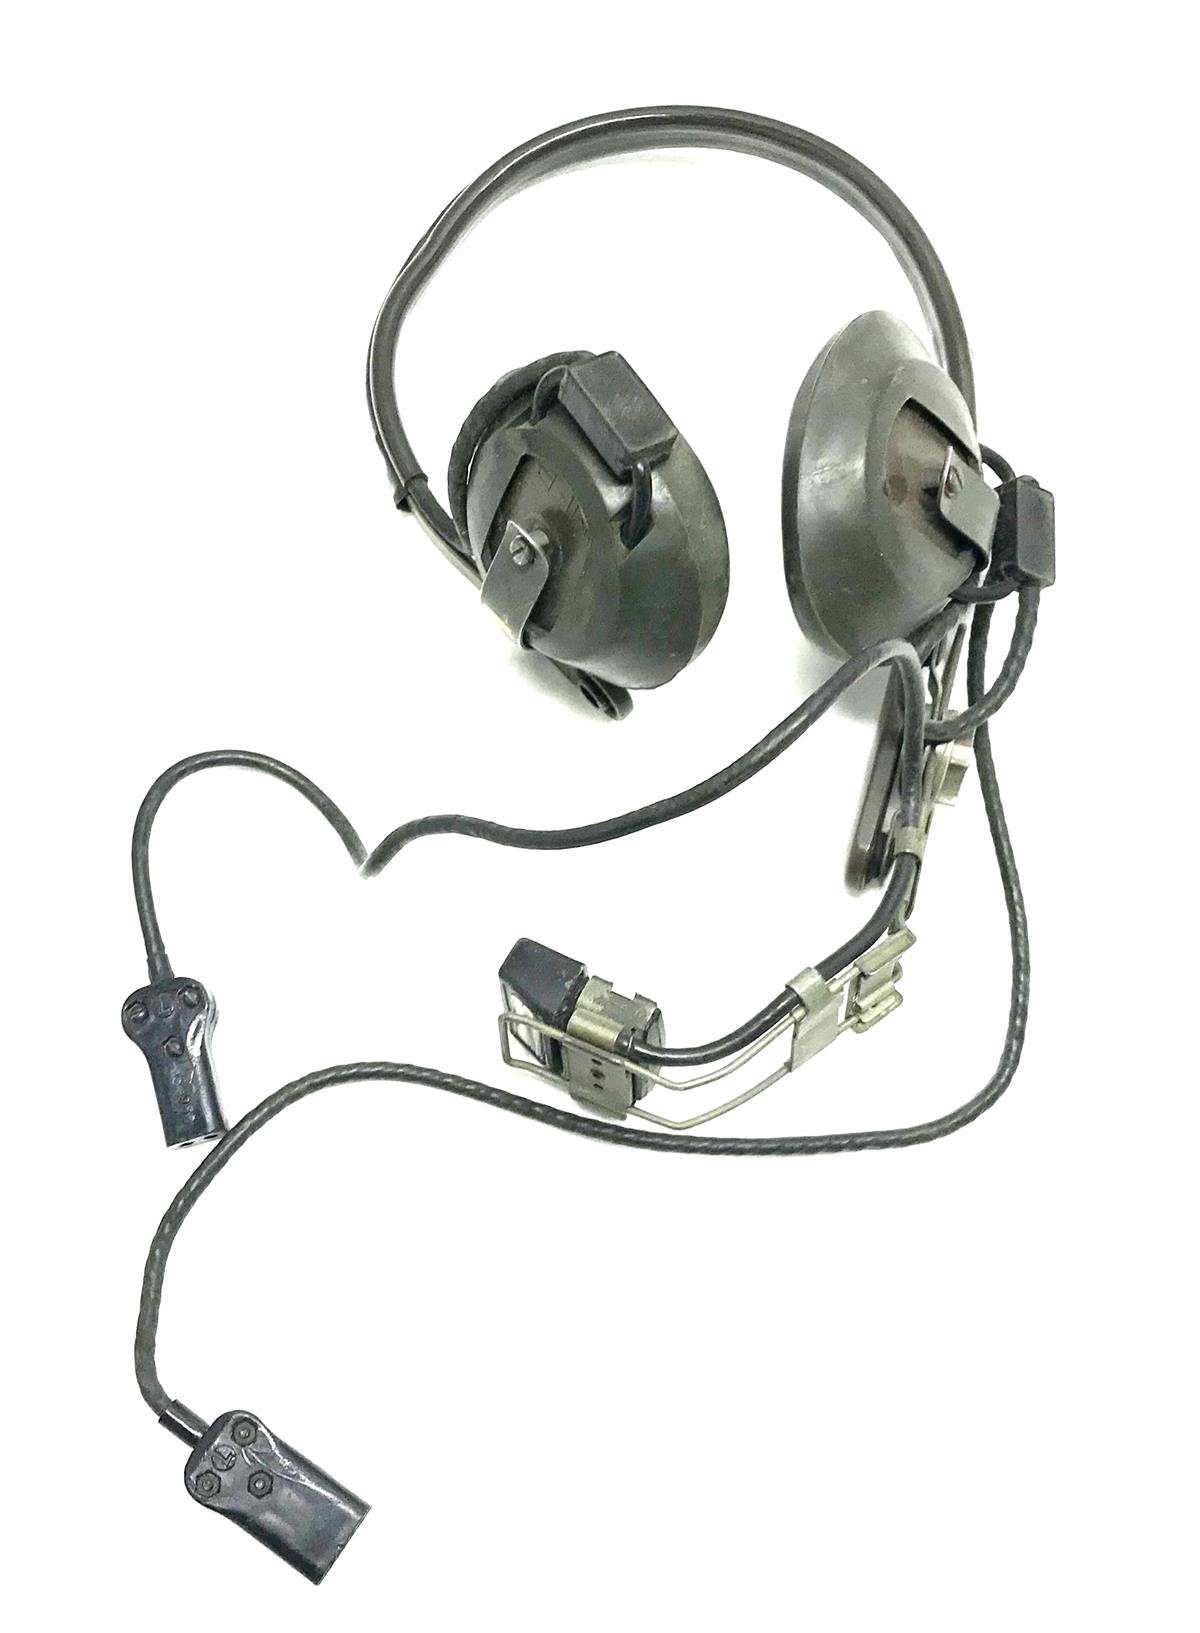 SP-2250 | SP-2250  ANGSA-6C Chest Set Group With Headset Microphone and Handset with U-77U Connector  (13).JPG